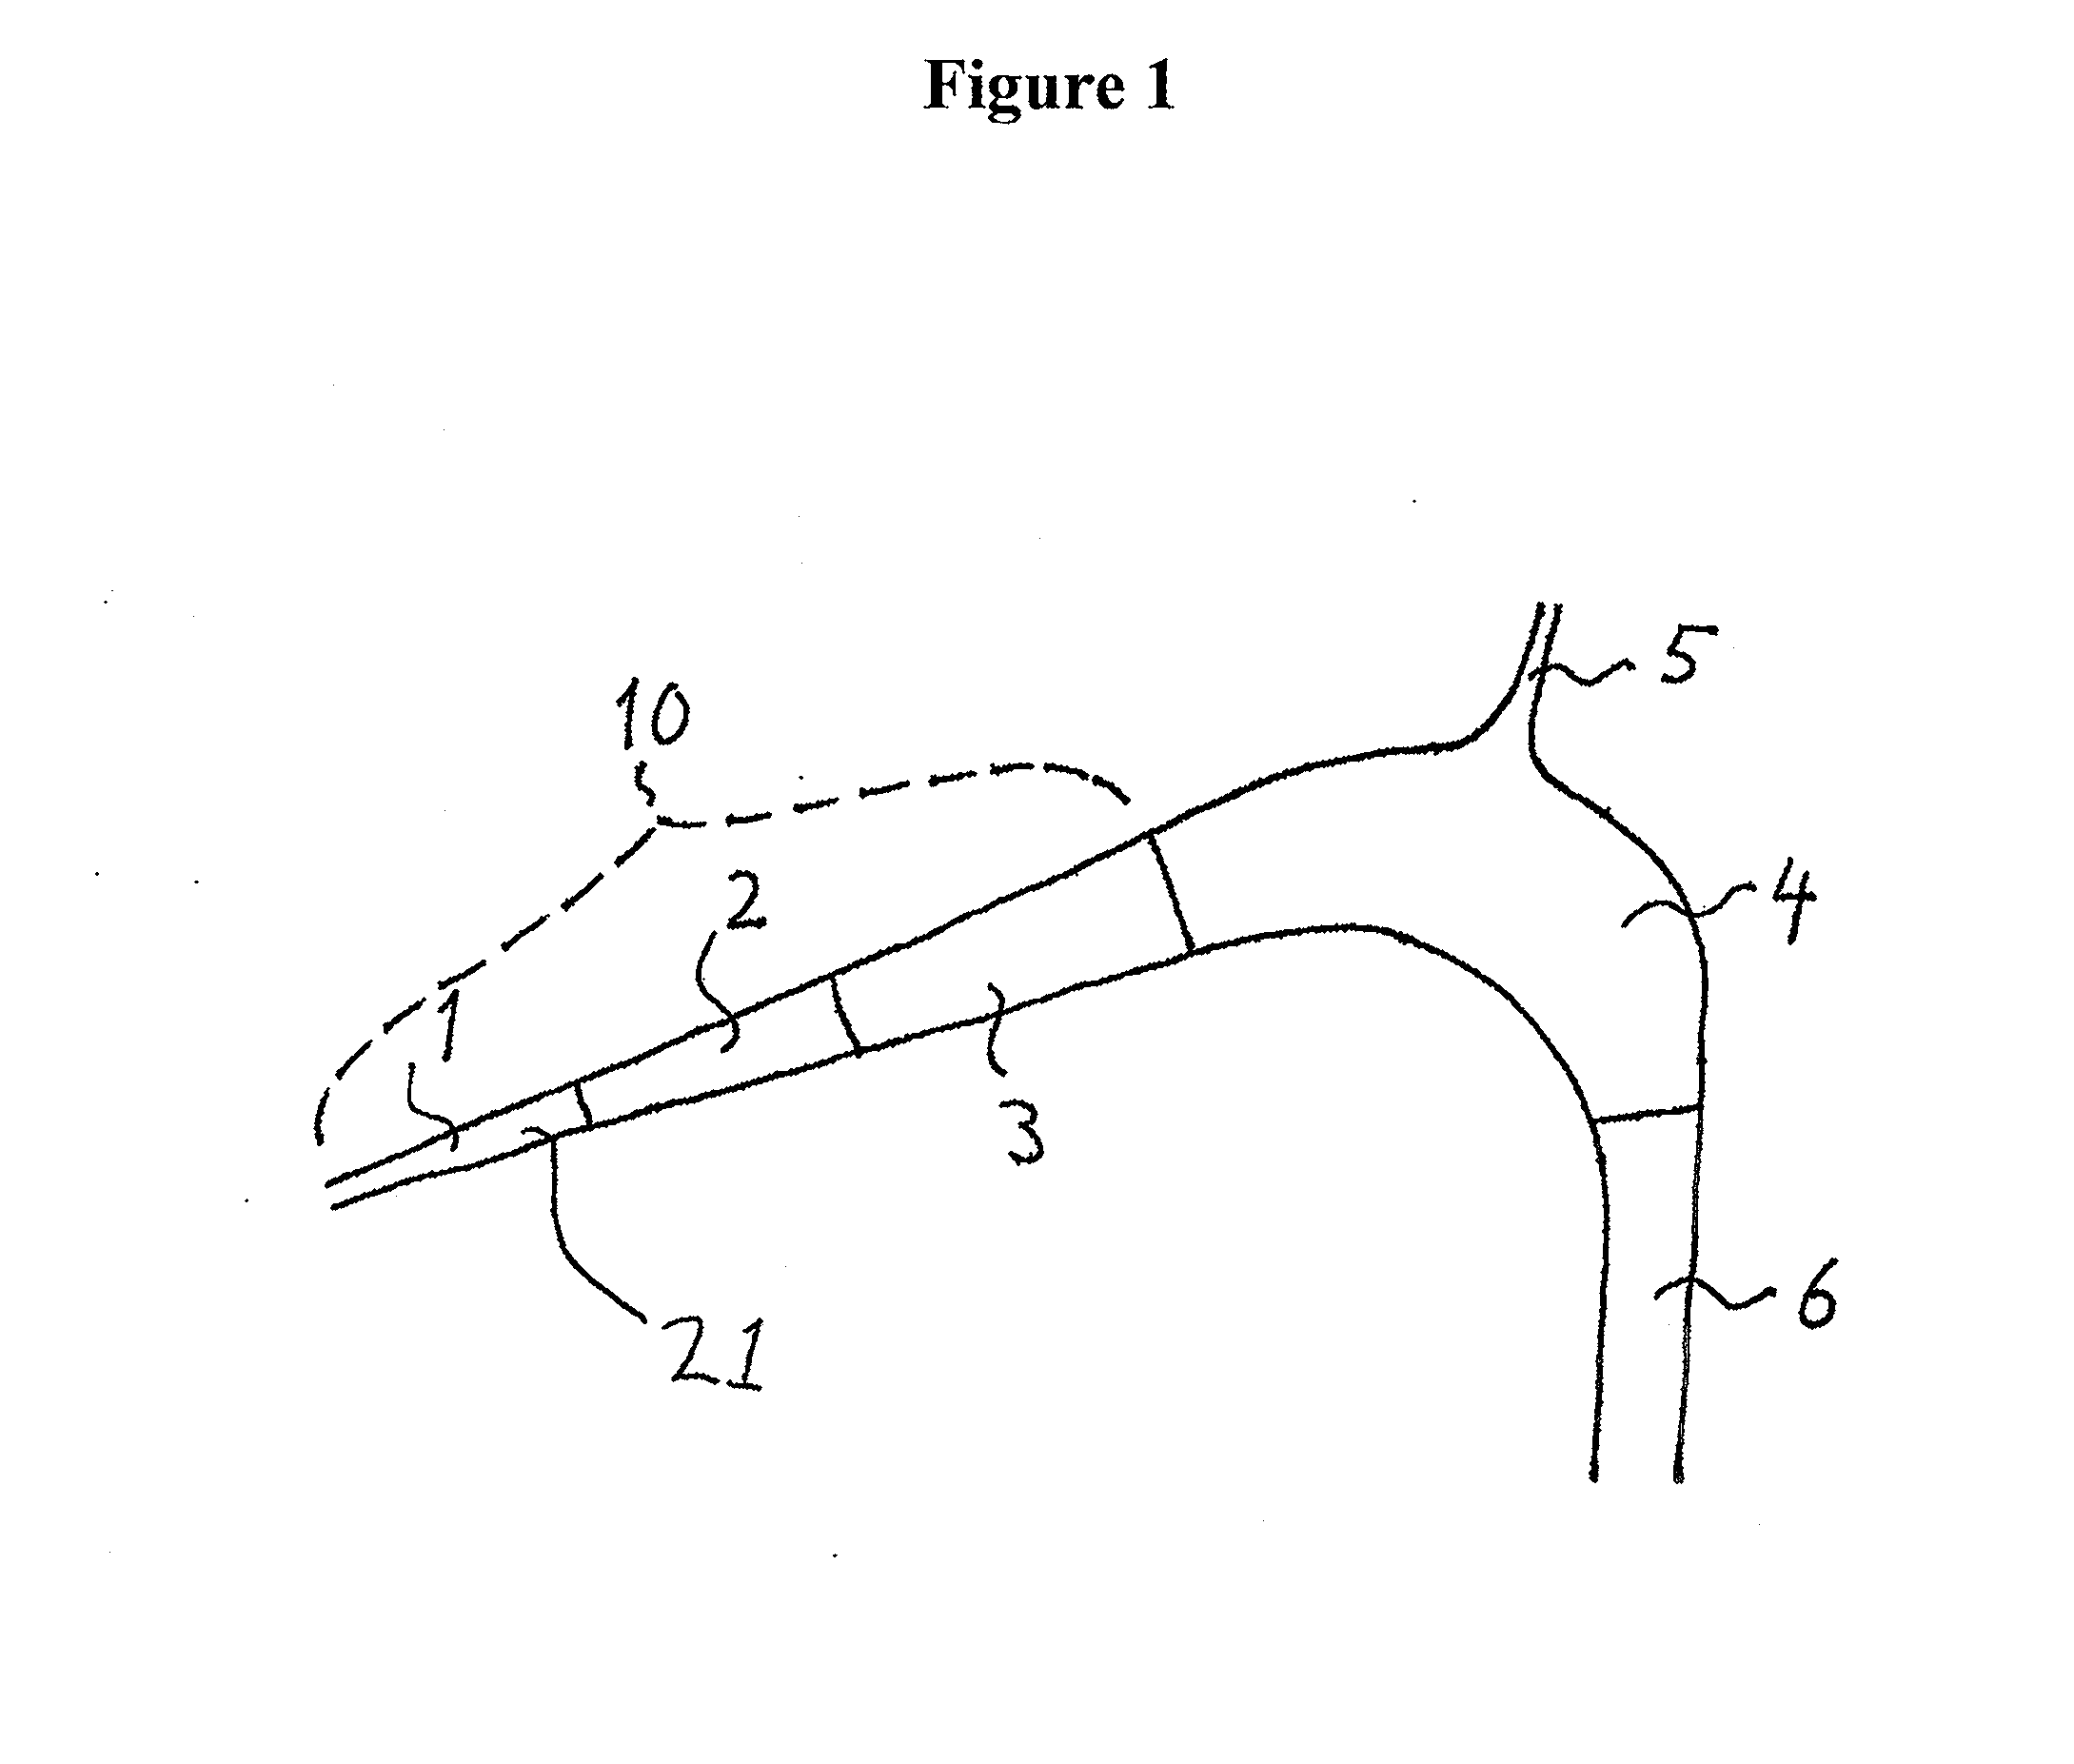 Bubble reducer for eliminating gas bubbles from a flow